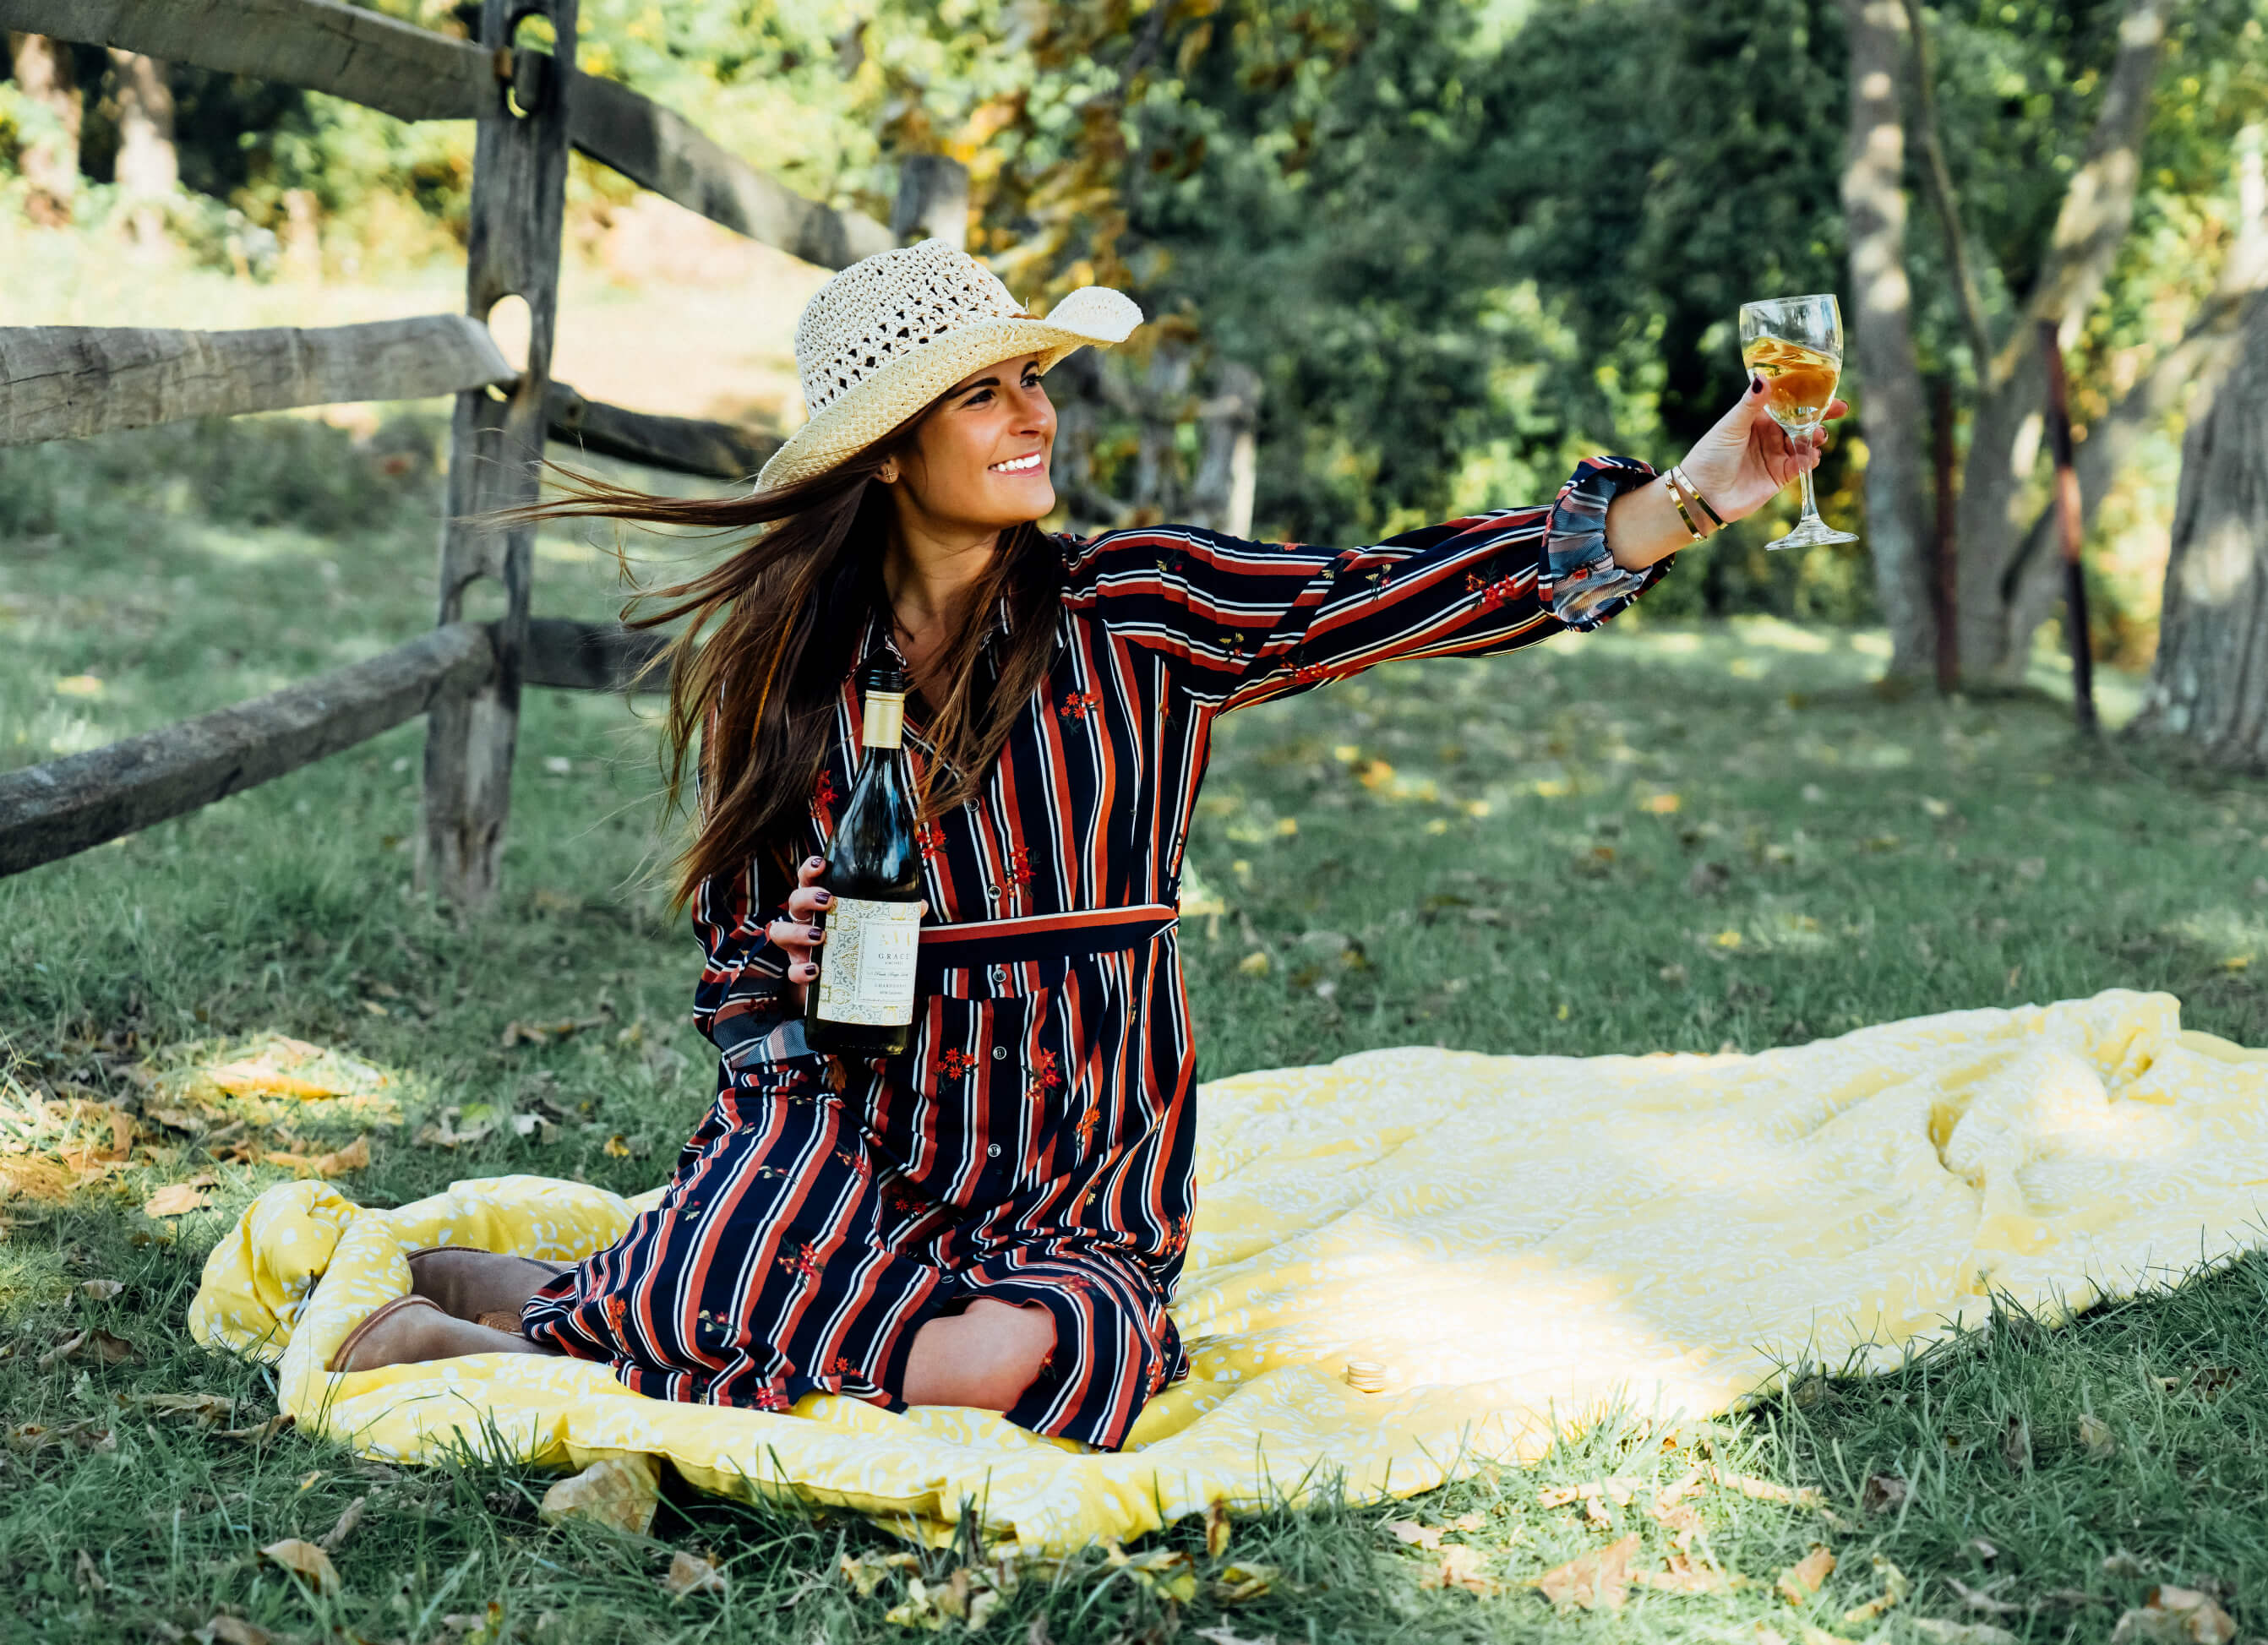 Miss Me Stripe Midi Shirtdress with Floral Embroidery, Straw Hat, Fall Dress Outfit Idea, AVA Grace Vineyards Chardonnay, Tilden of To Be Bright